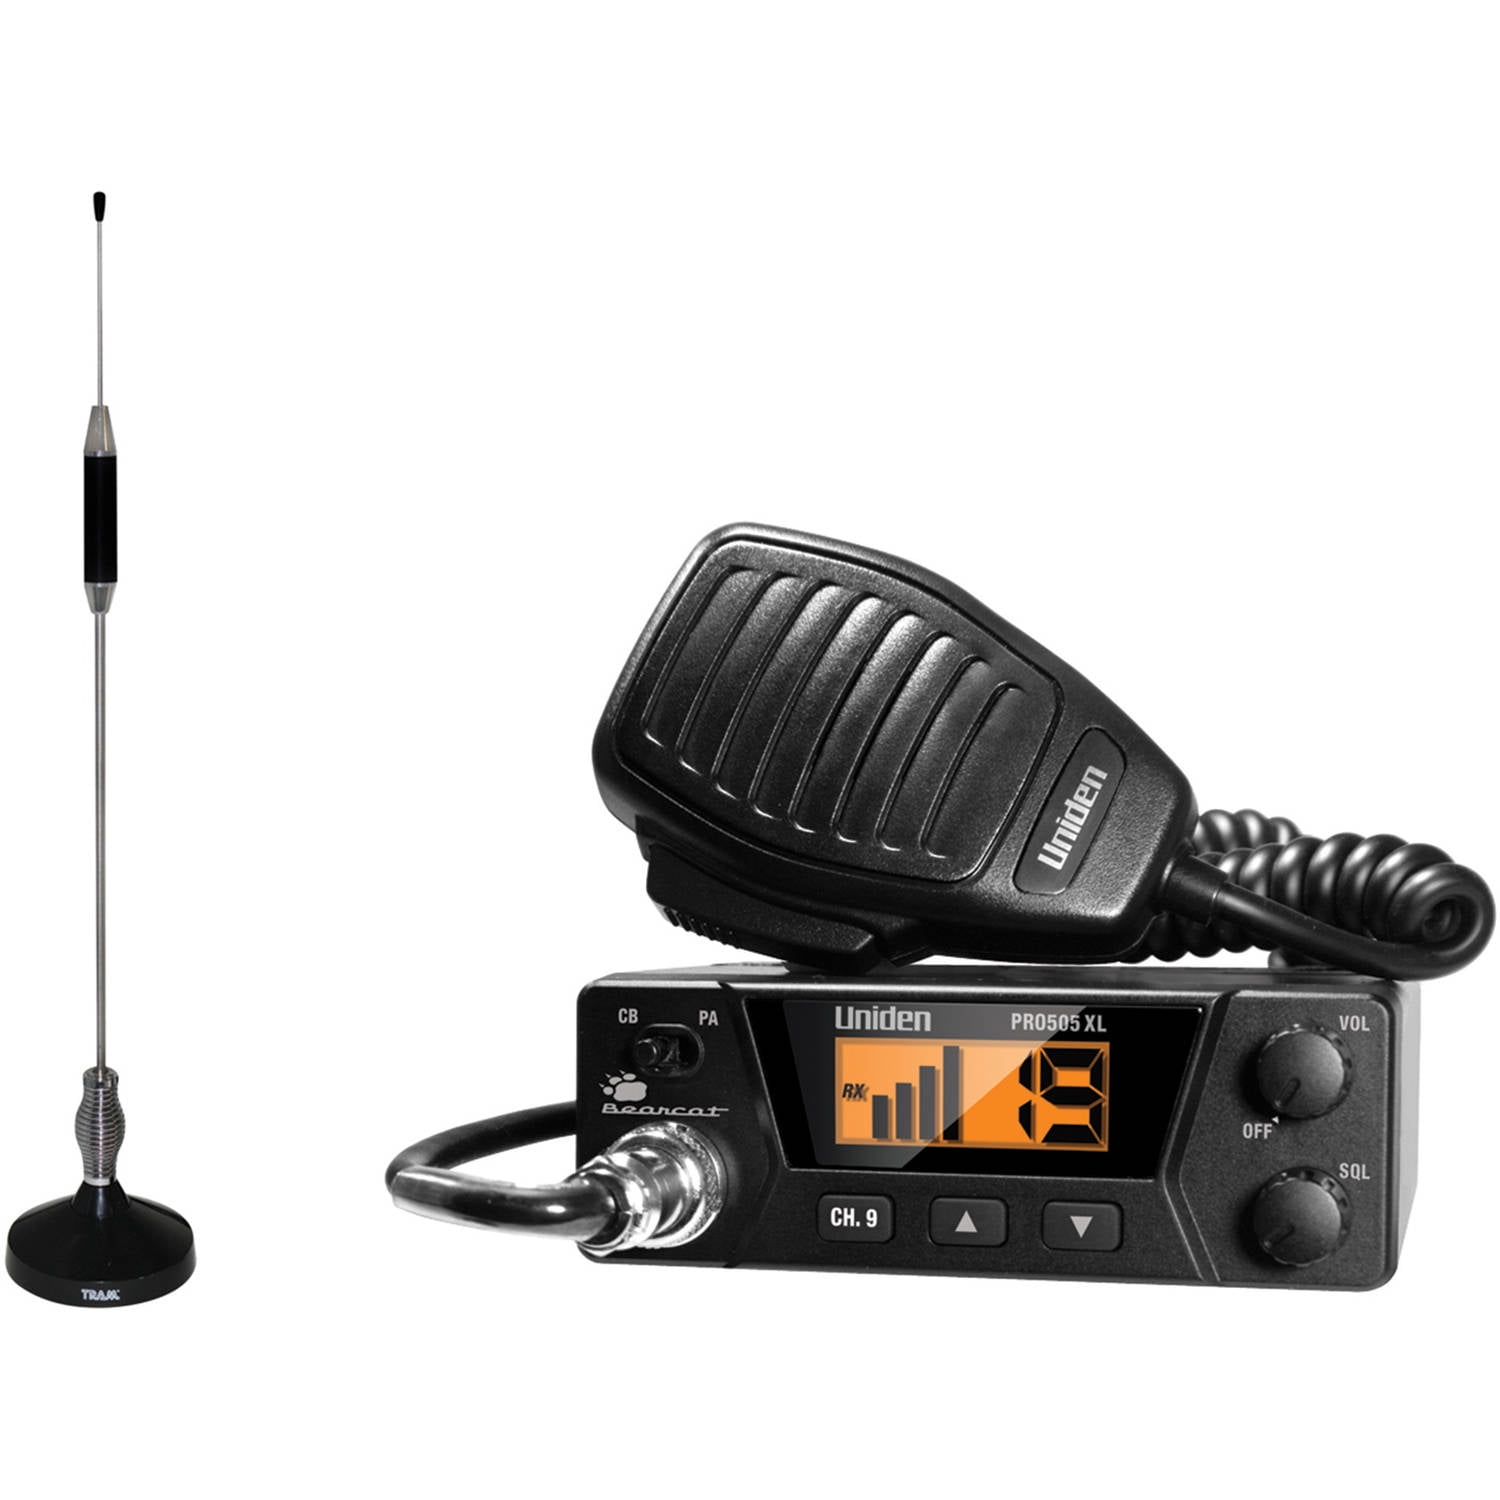 Public Address Compact Design External Speaker Jack Pro-Series PA Instant Emergency Channel 9 Uniden PRO505XL 40-Channel CB Radio - Black Large Easy to Read Display Function